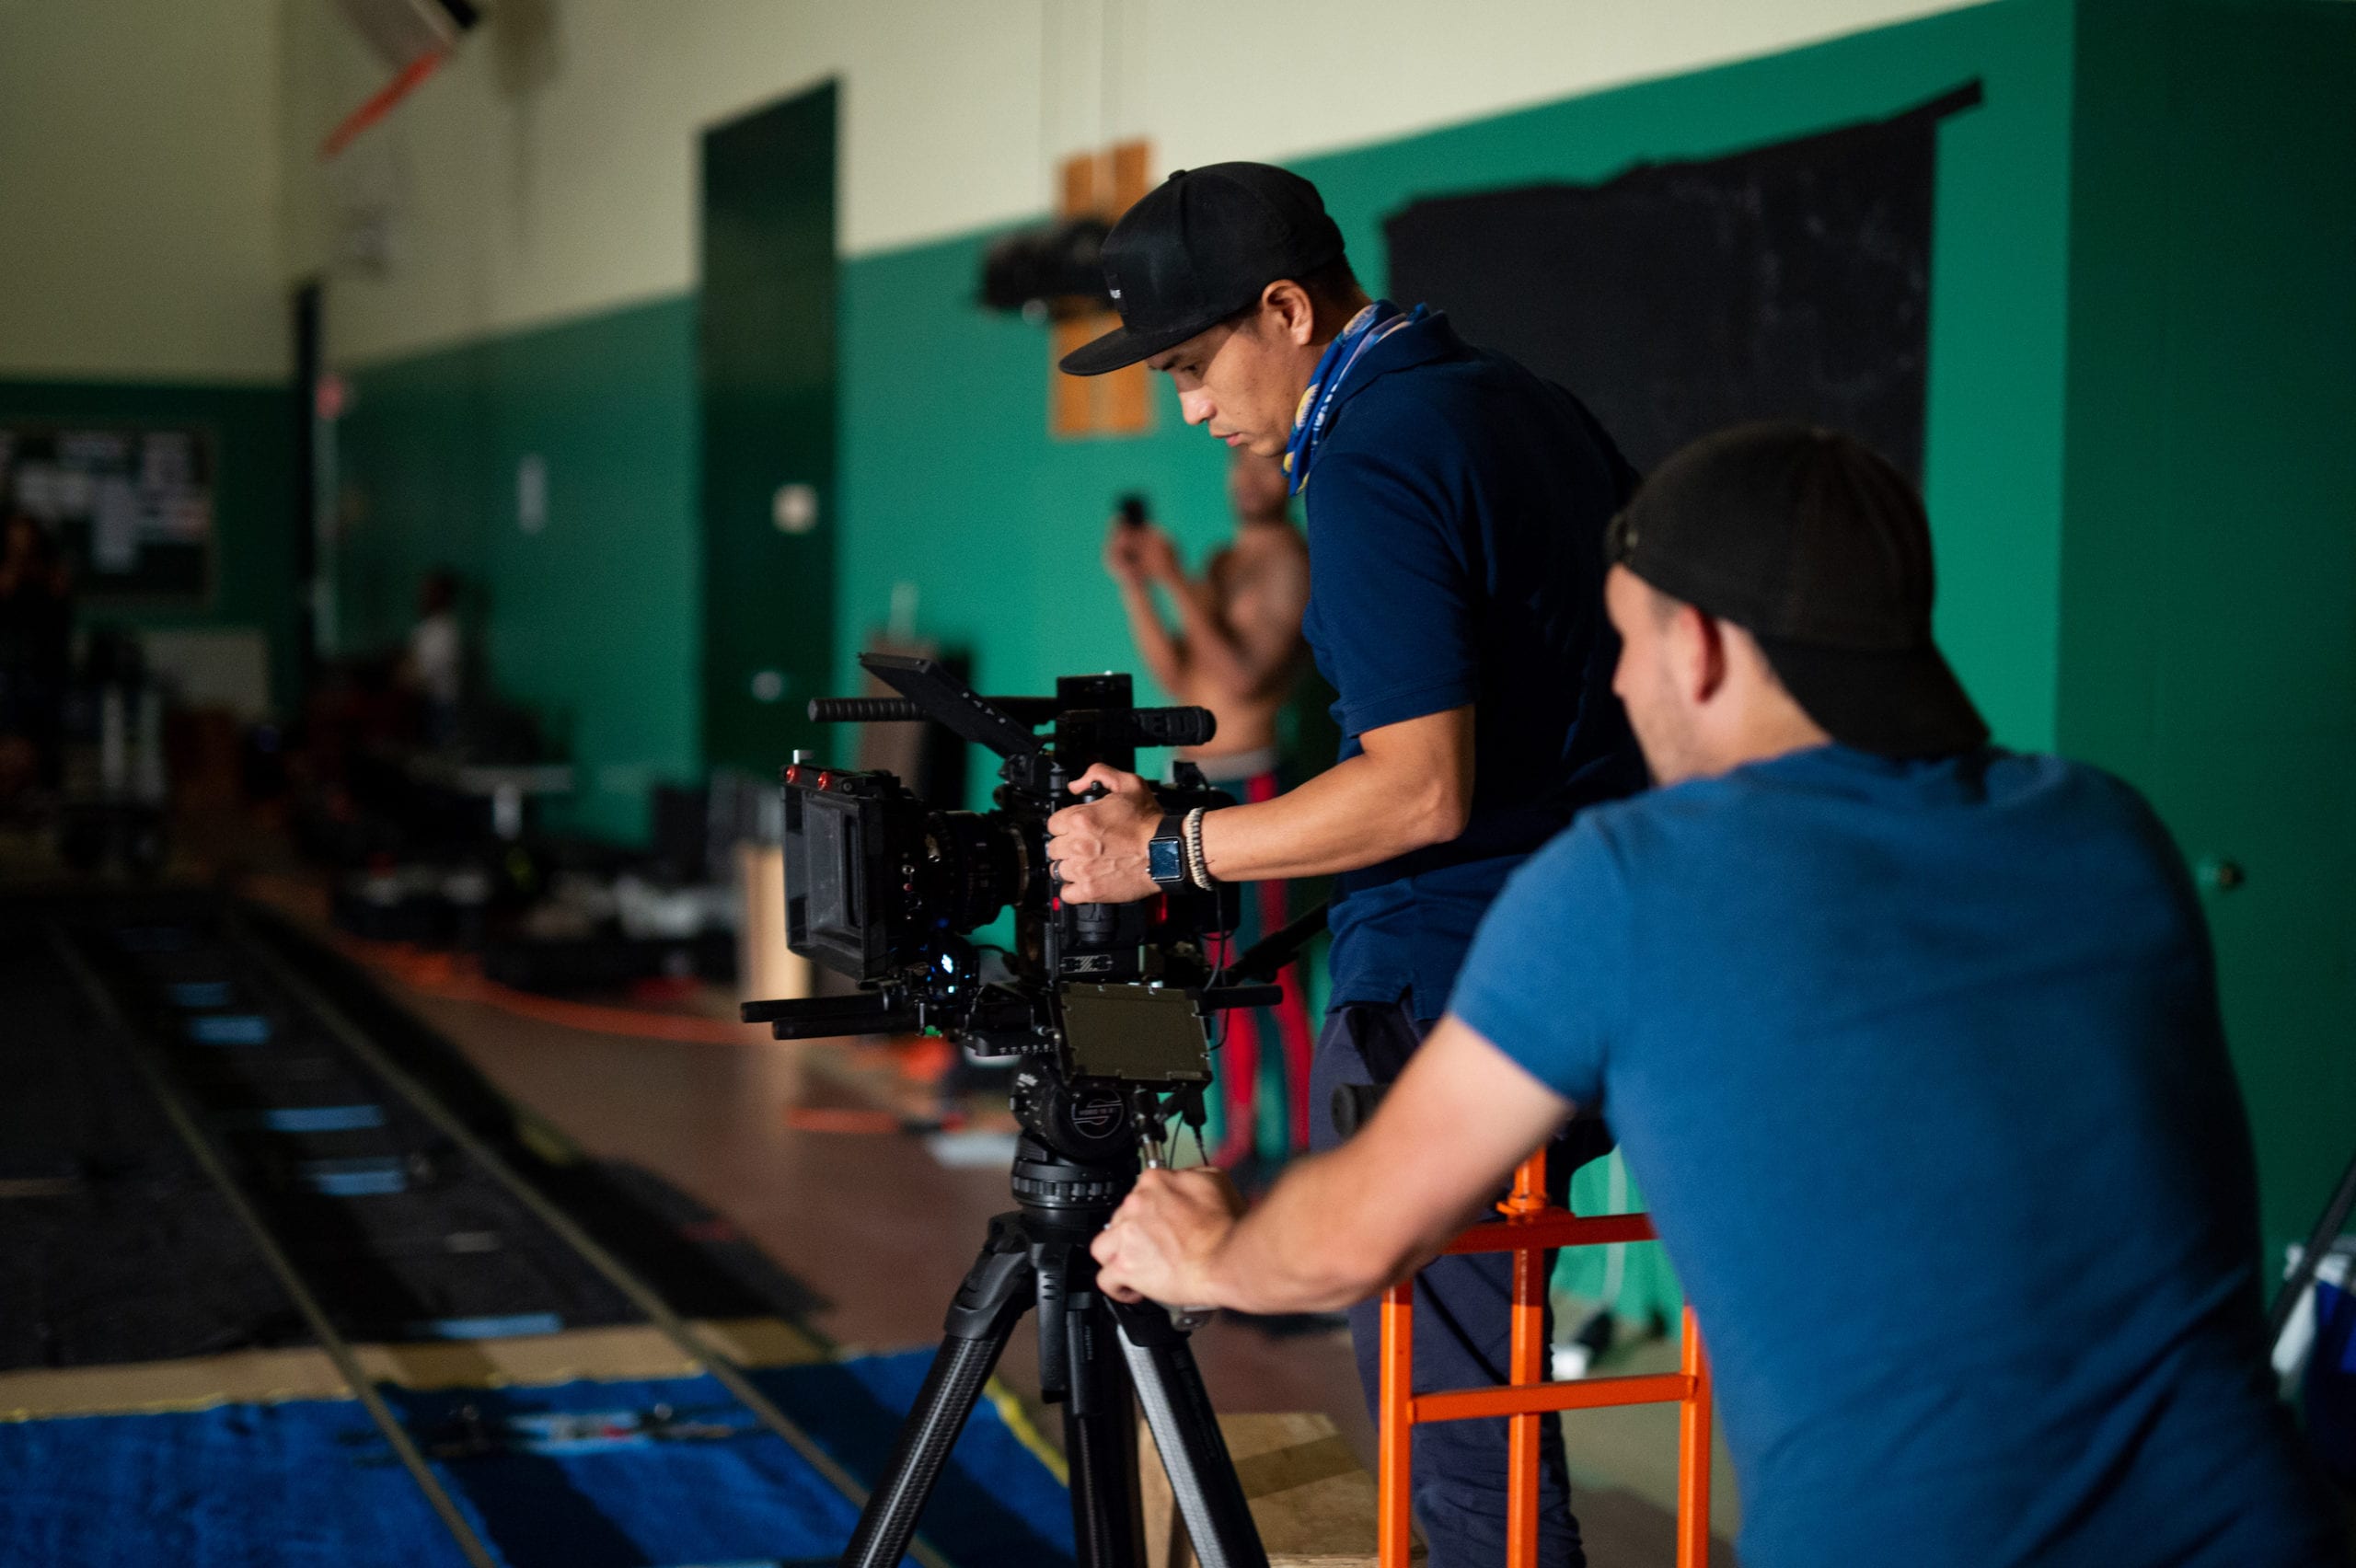 Nike Two male film crew members adjusting equipment for filming on a basketball court